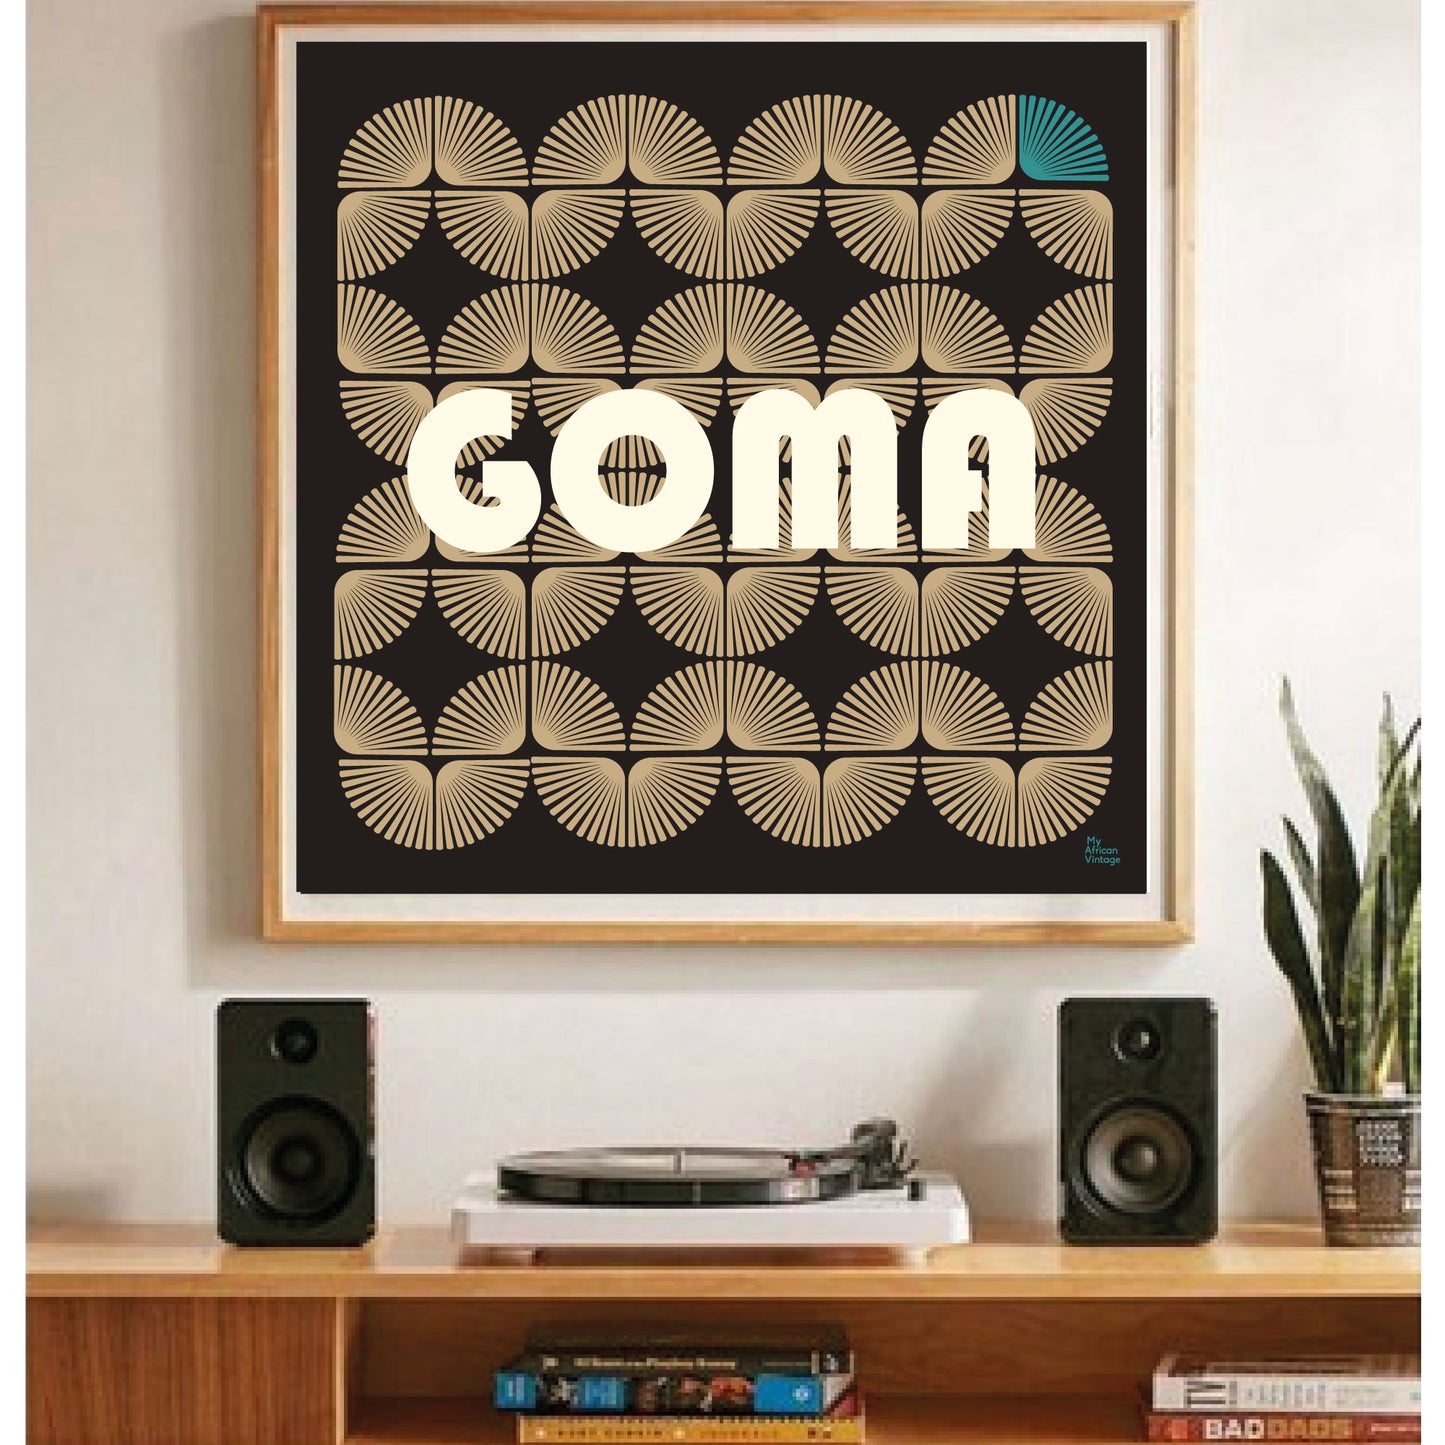 "Goma" retro style poster - "My African Vintage" collection